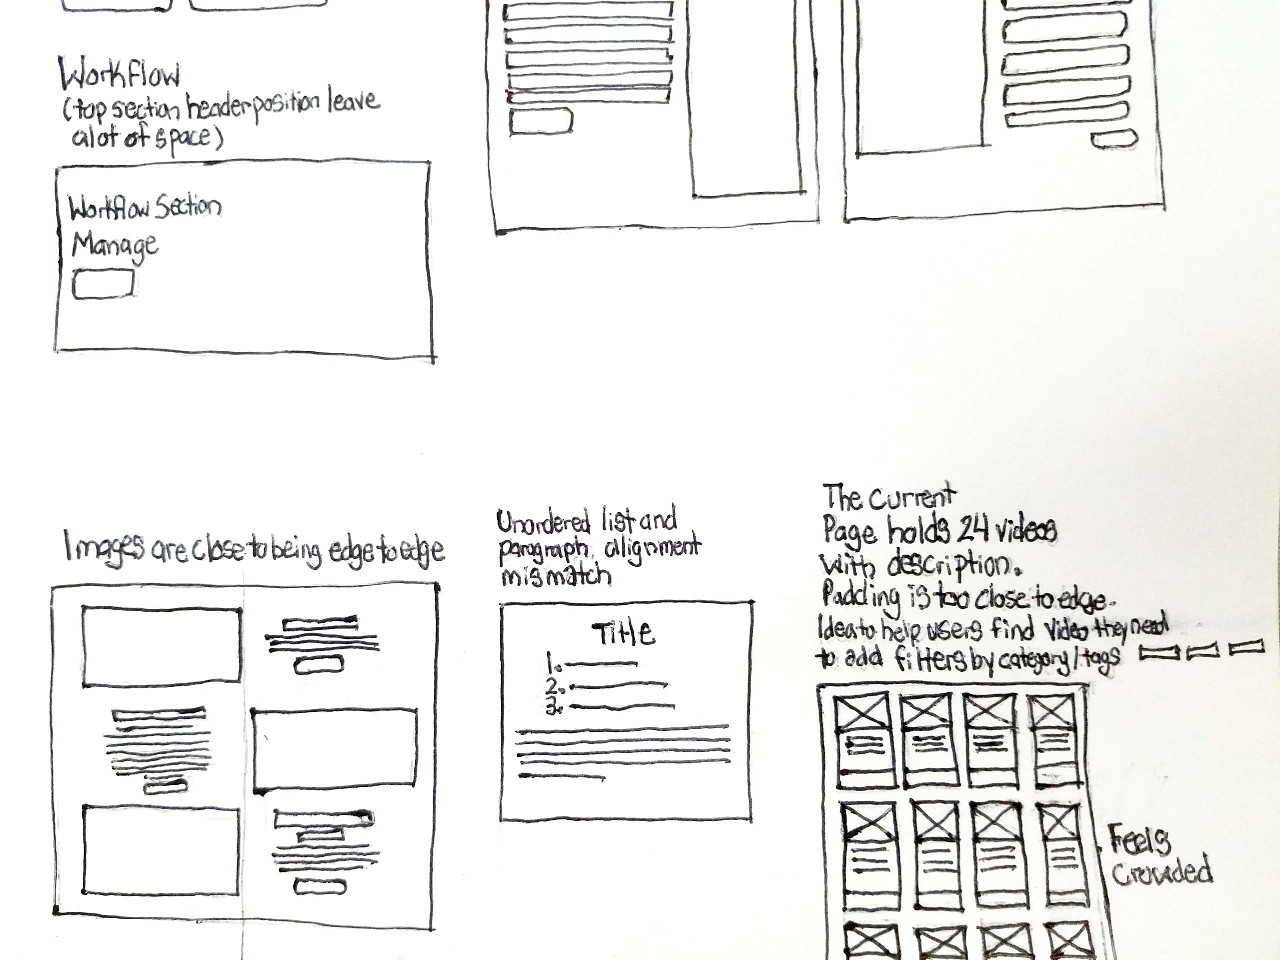 Additional sketches of issues found in a website audit with correction options on the side.